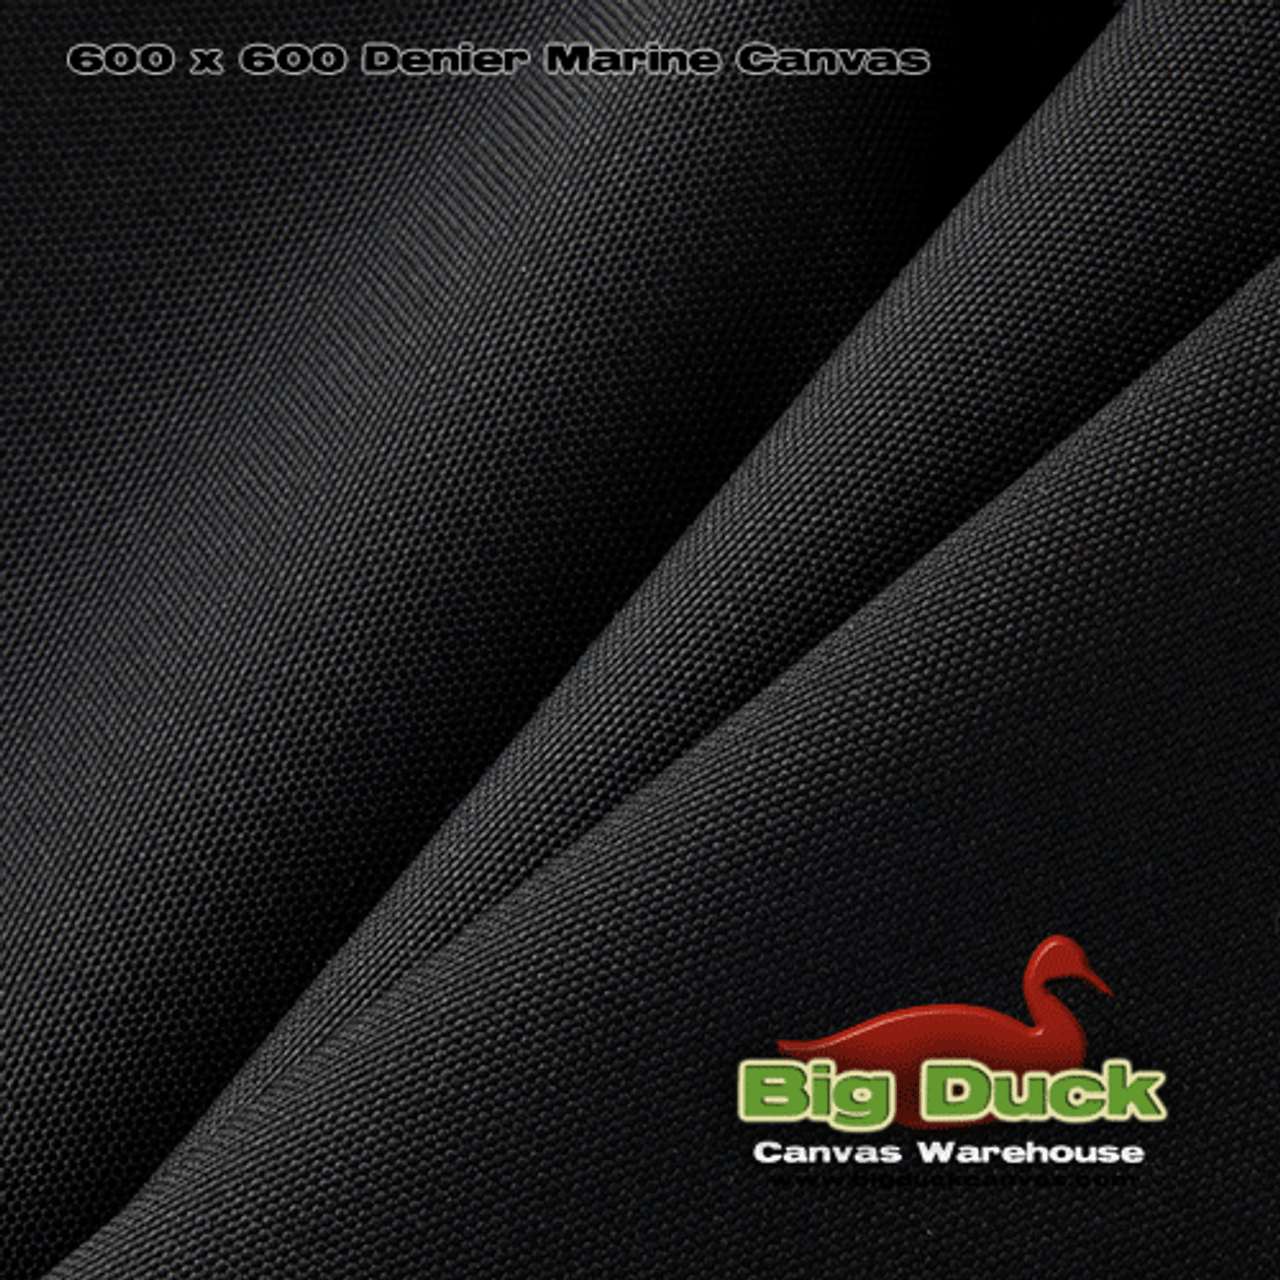 100% Polyester Super Poly fabric